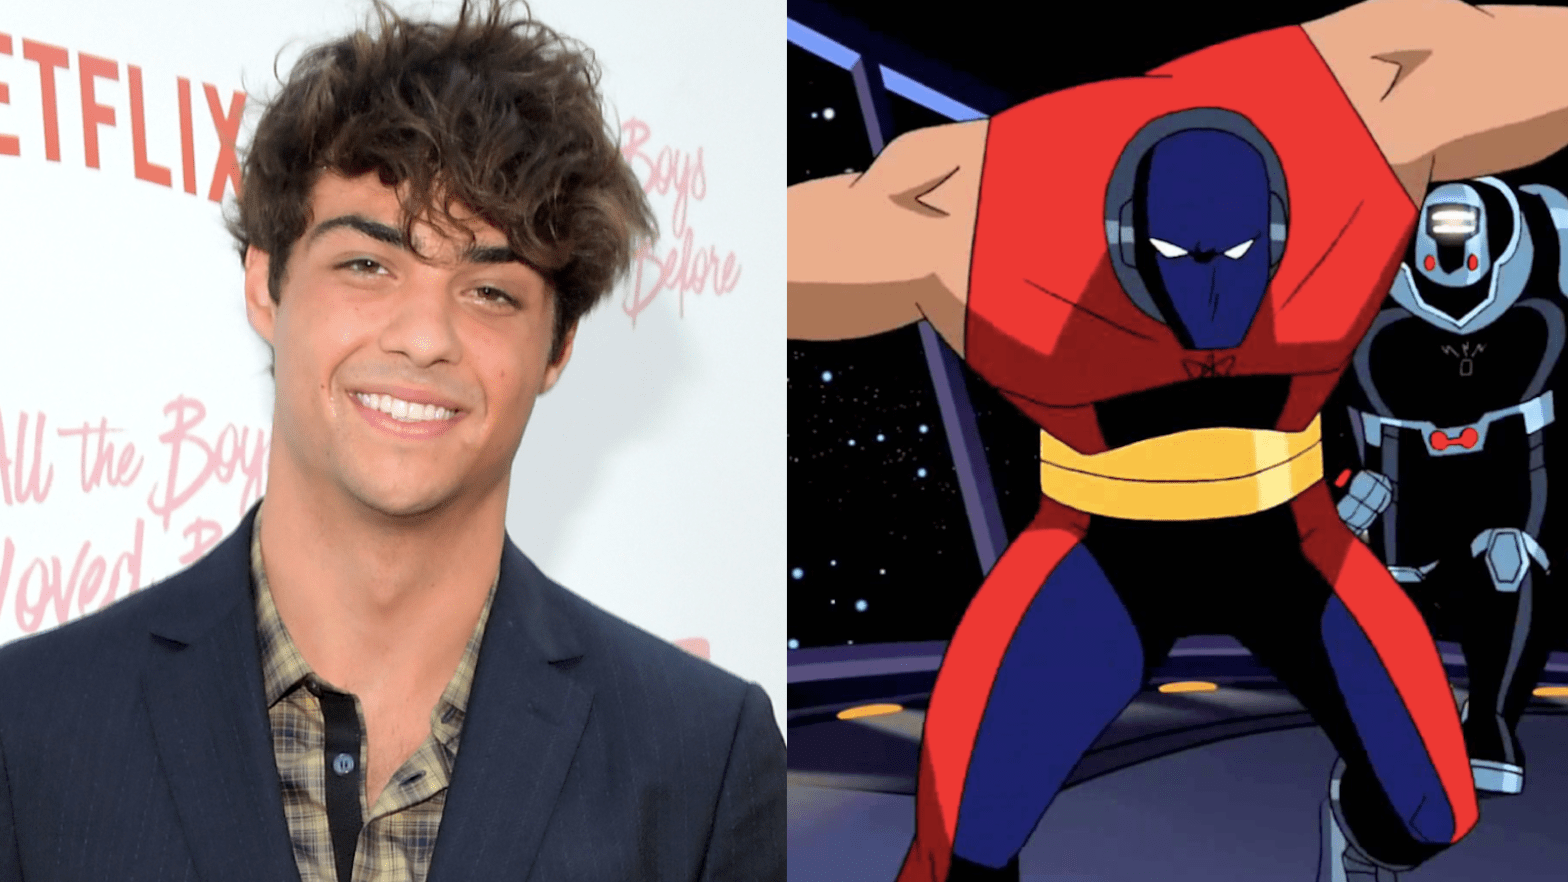 Noah Centineo attends the premiere of Netflix's To All the Boys I've Loved Before; Atom Smasher preparing to smash. (Photo: Left: Charley Gallay/Getty, Right: Warner Bros. Animation, Getty Images)